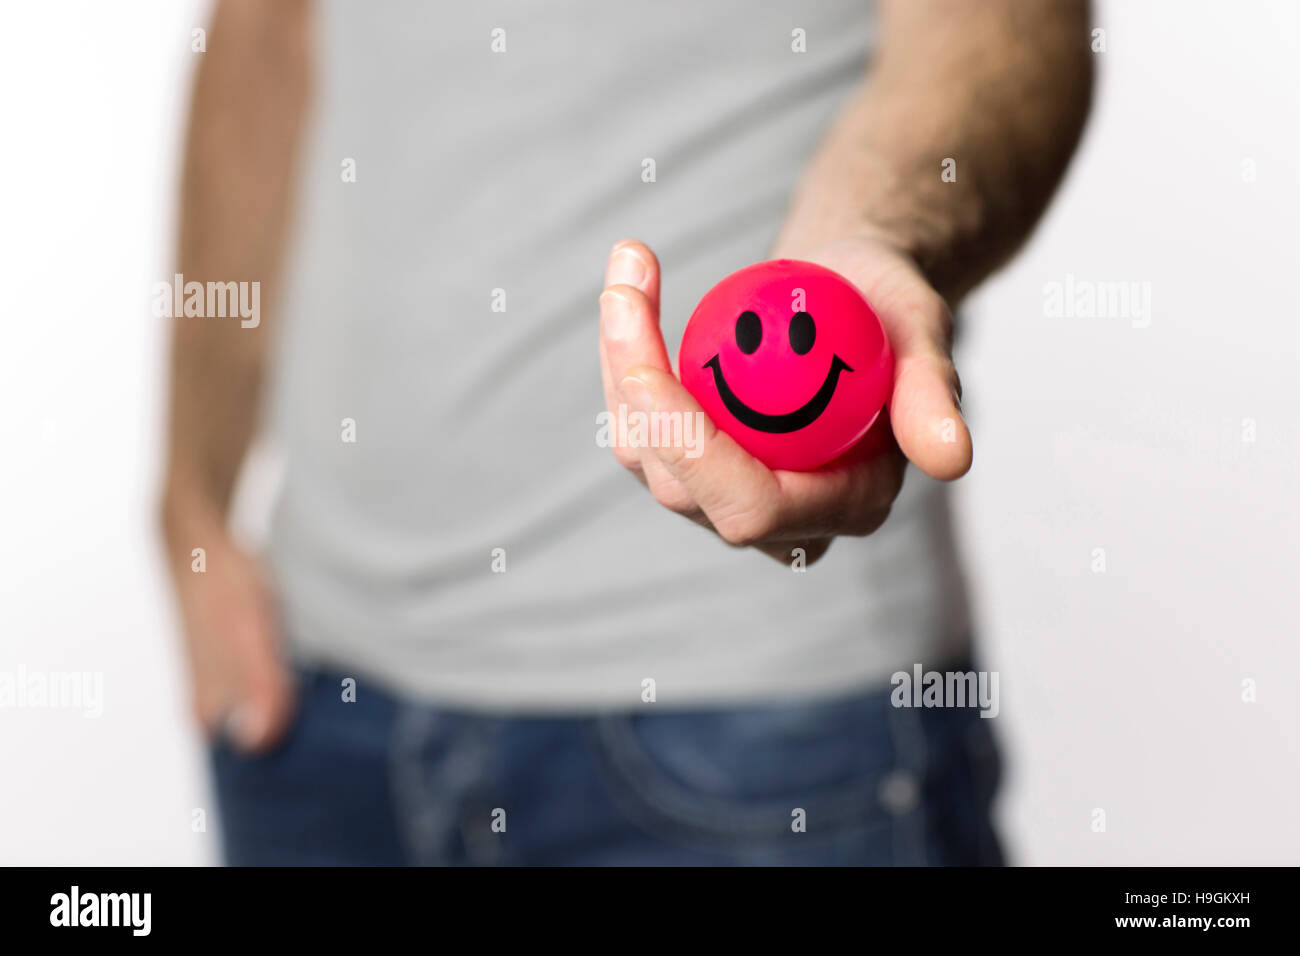 Smiling is easy ... is at hand! Stock Photo